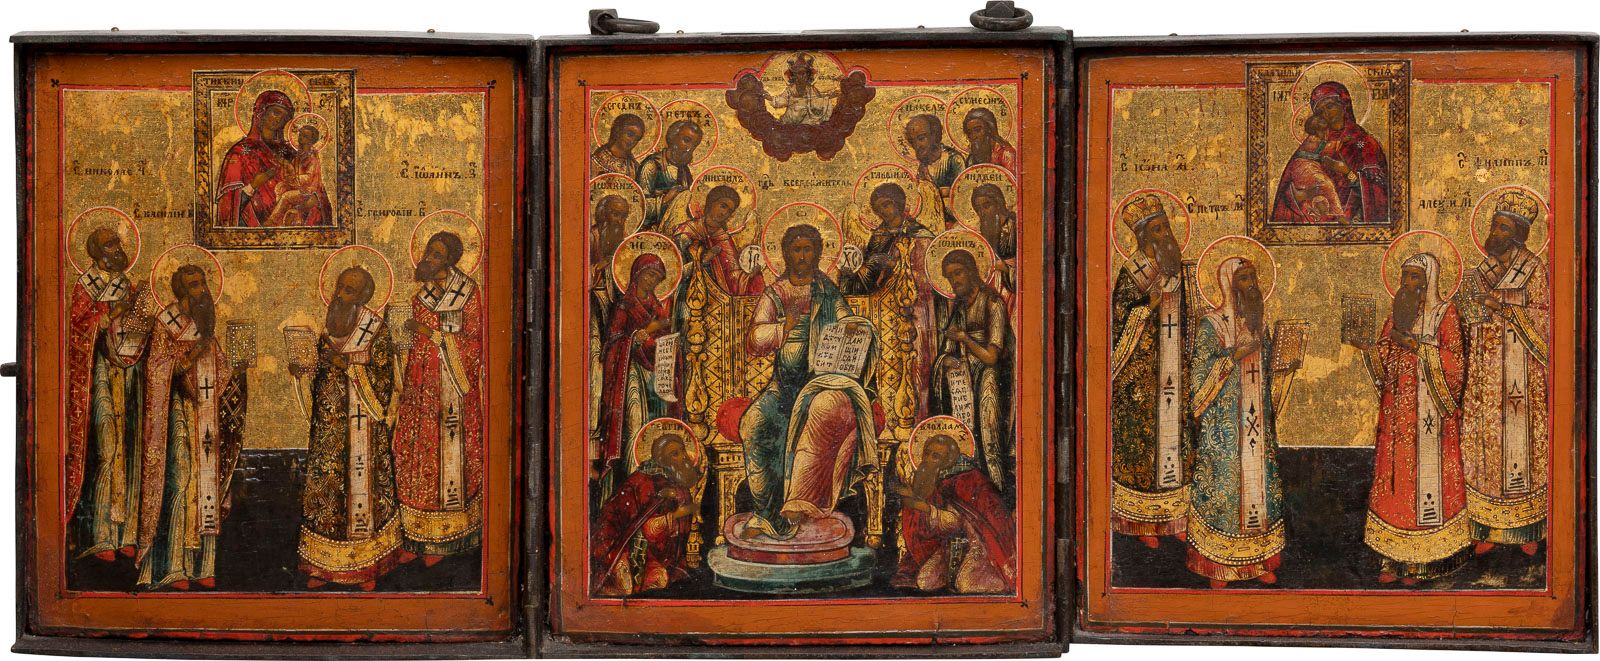 A LARGE TRIPTYCH SHOWING THE EXTENDED DEISIS, IMAGES OF THE GRAN TRIPTICO QUE MU&hellip;